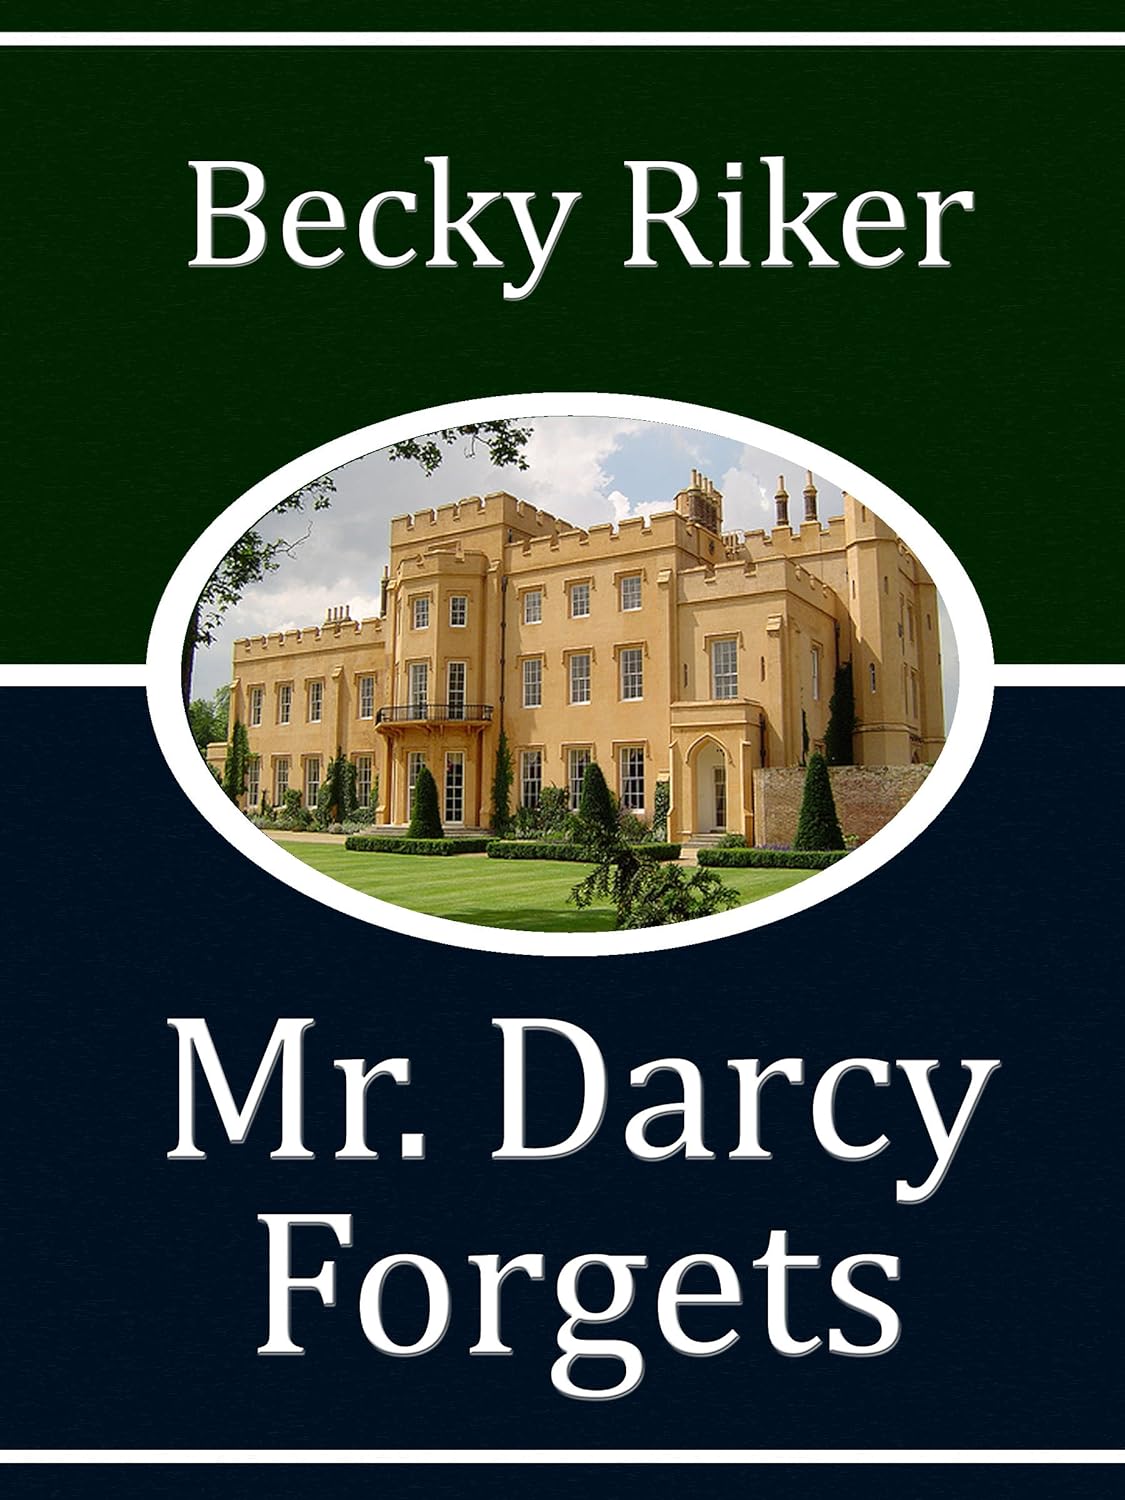 Mr. Darcy Forgets